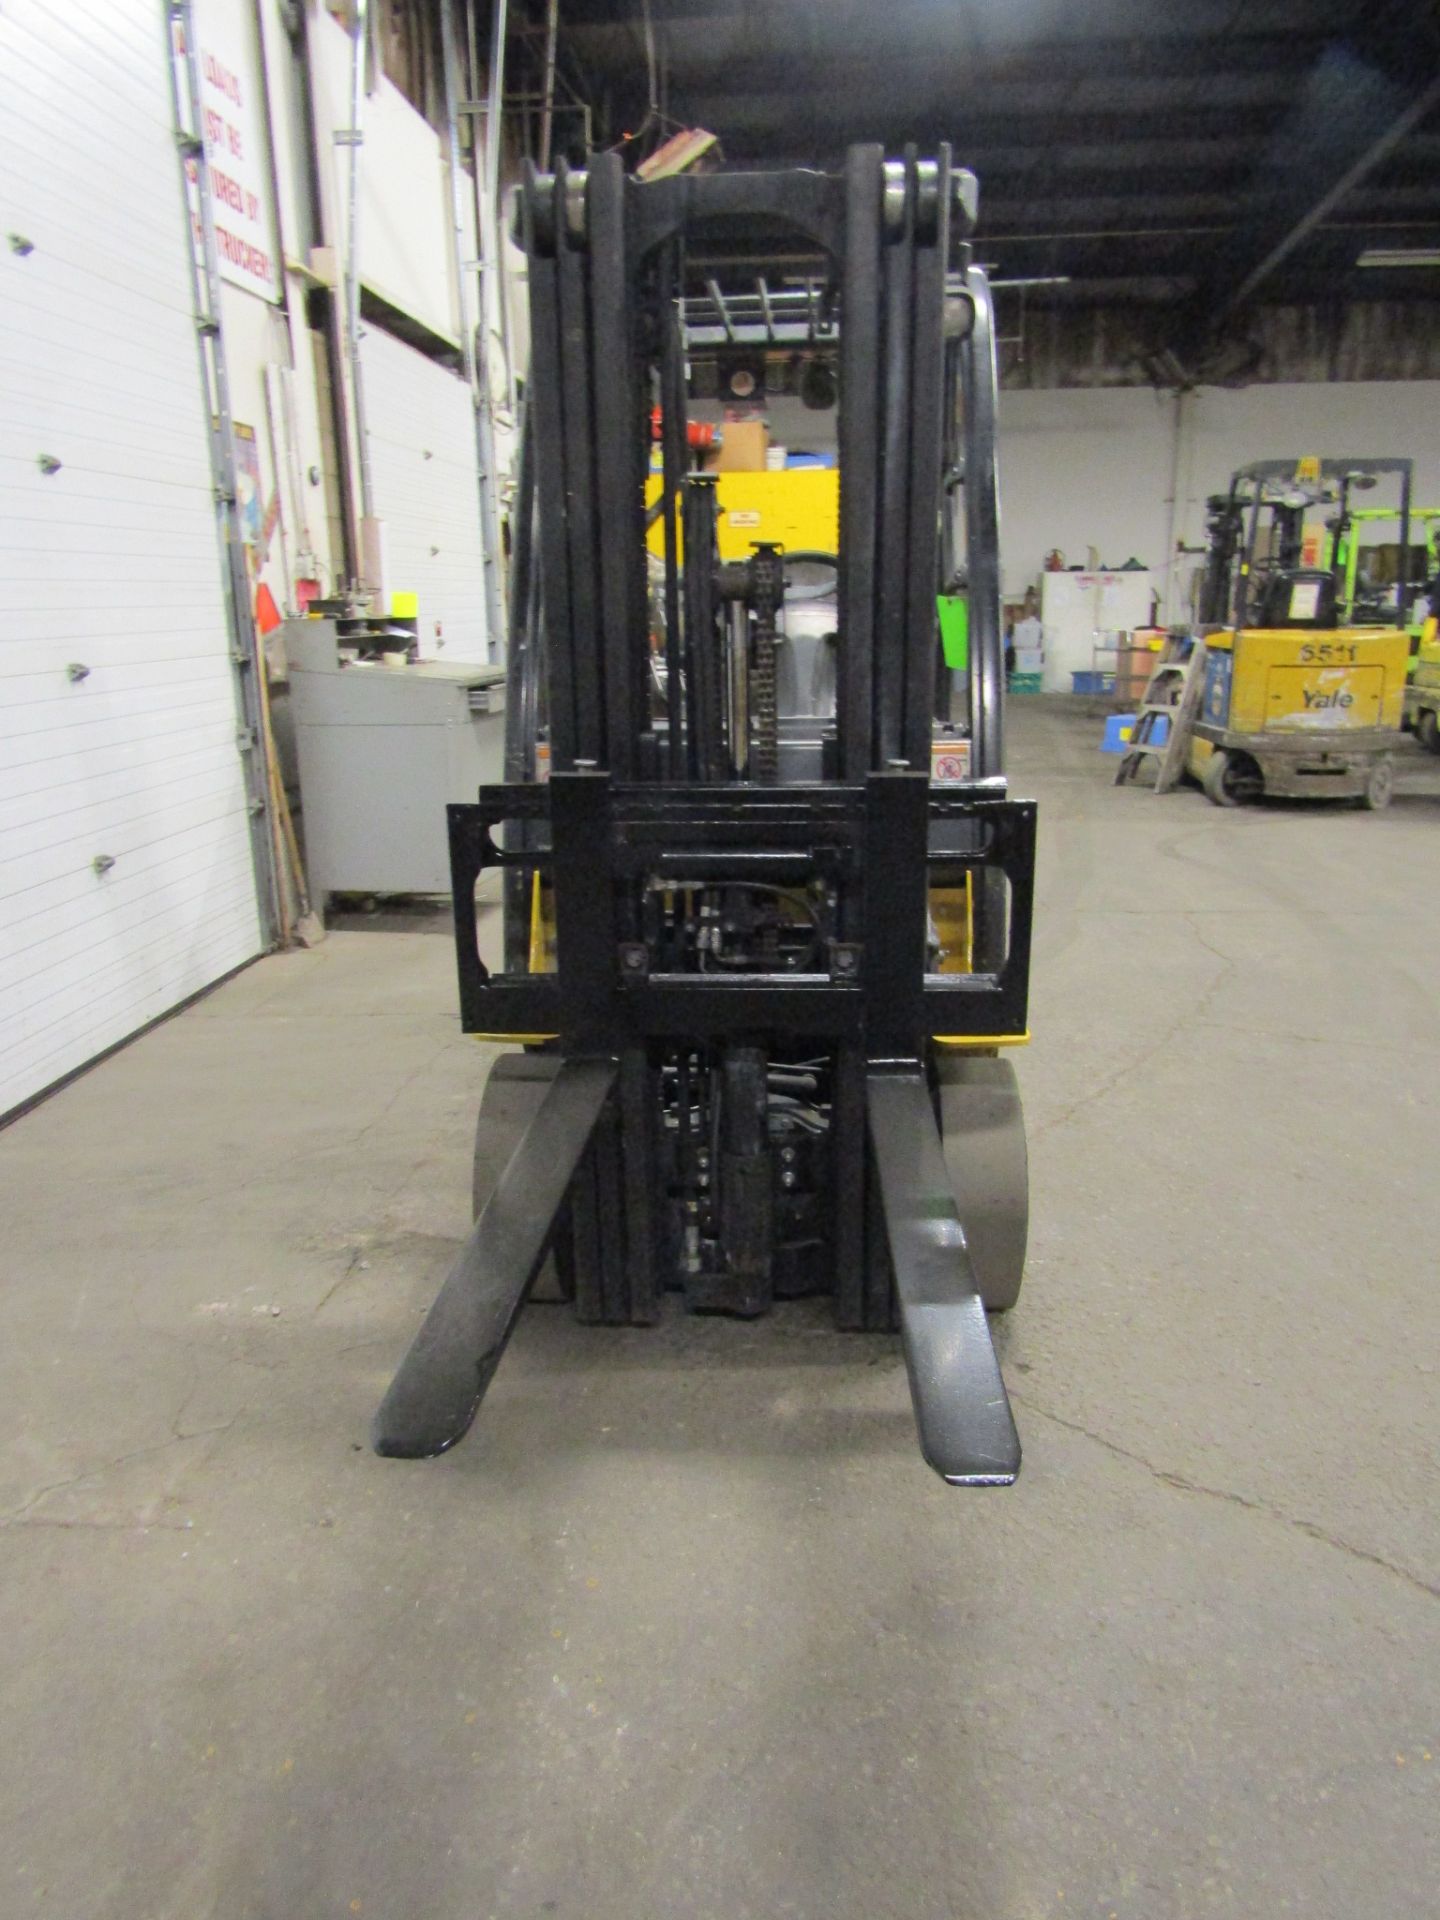 2009 Yale 5000lbs Capacity Forklift - LPG (propane) with 3-stage mast & sideshift (no tank included) - Image 2 of 2